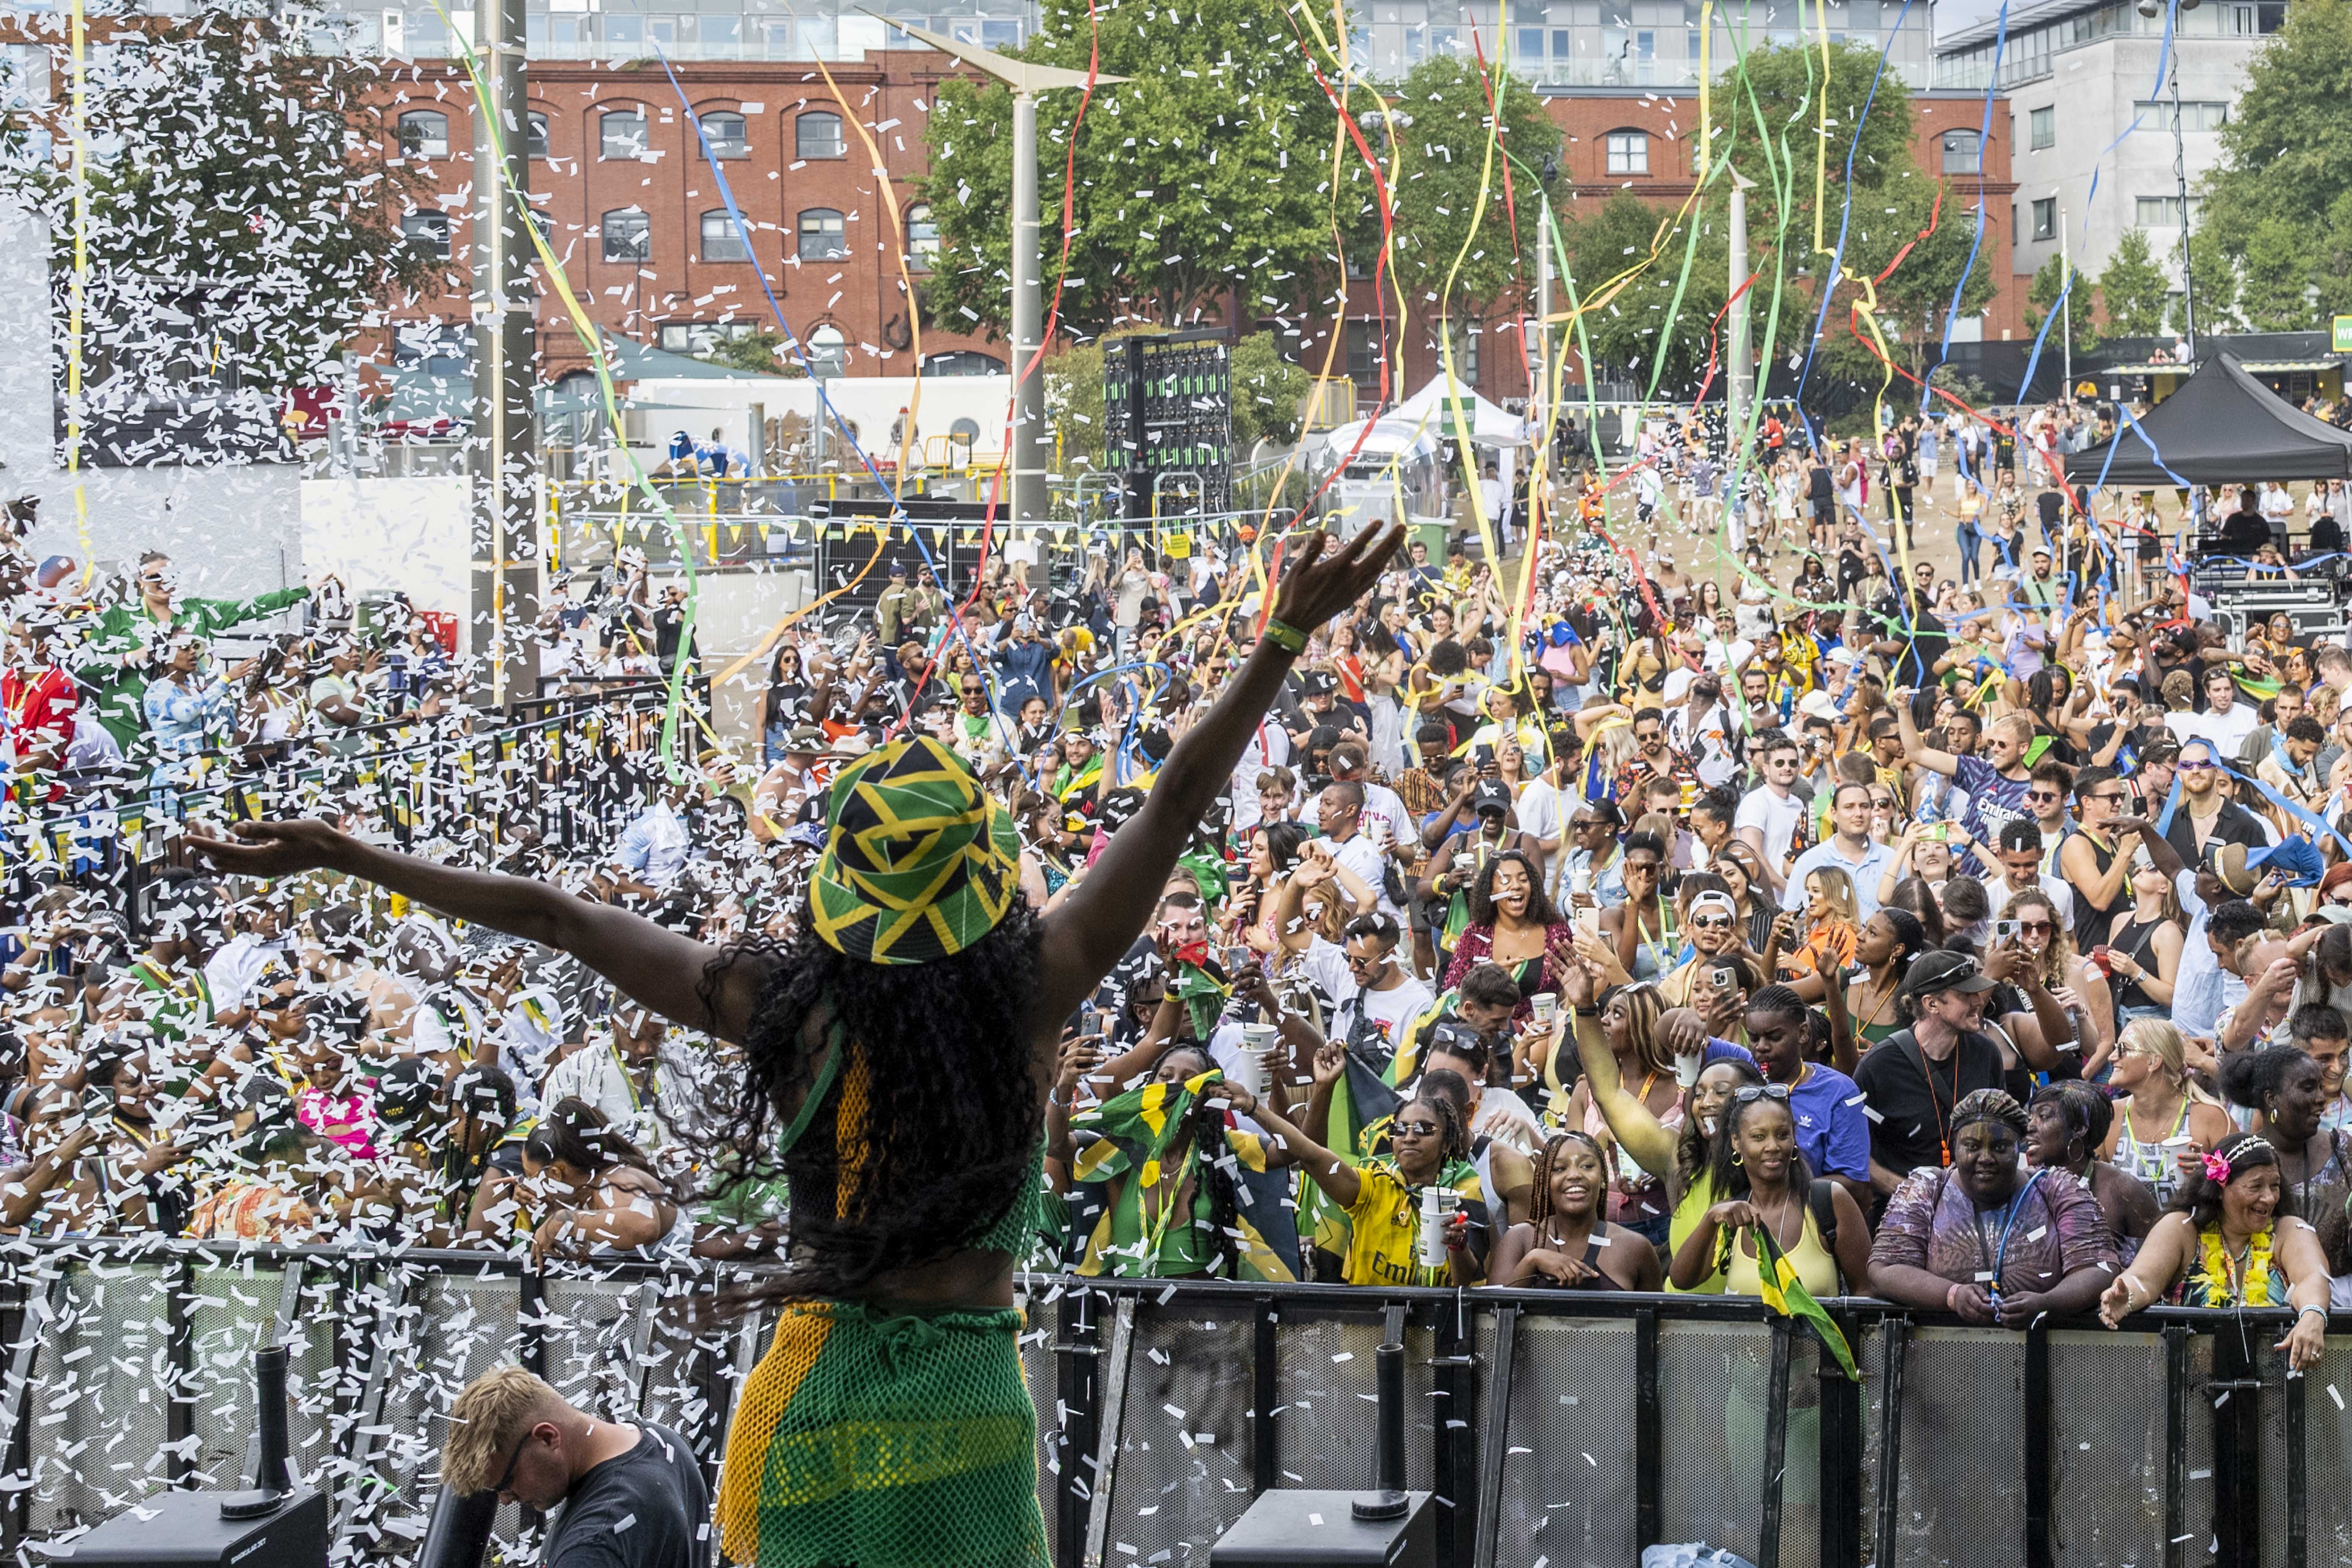 Confetti rains down over the crowds at the Wray & Nephew stage at the Emslie Horniman’s Pleasance Park